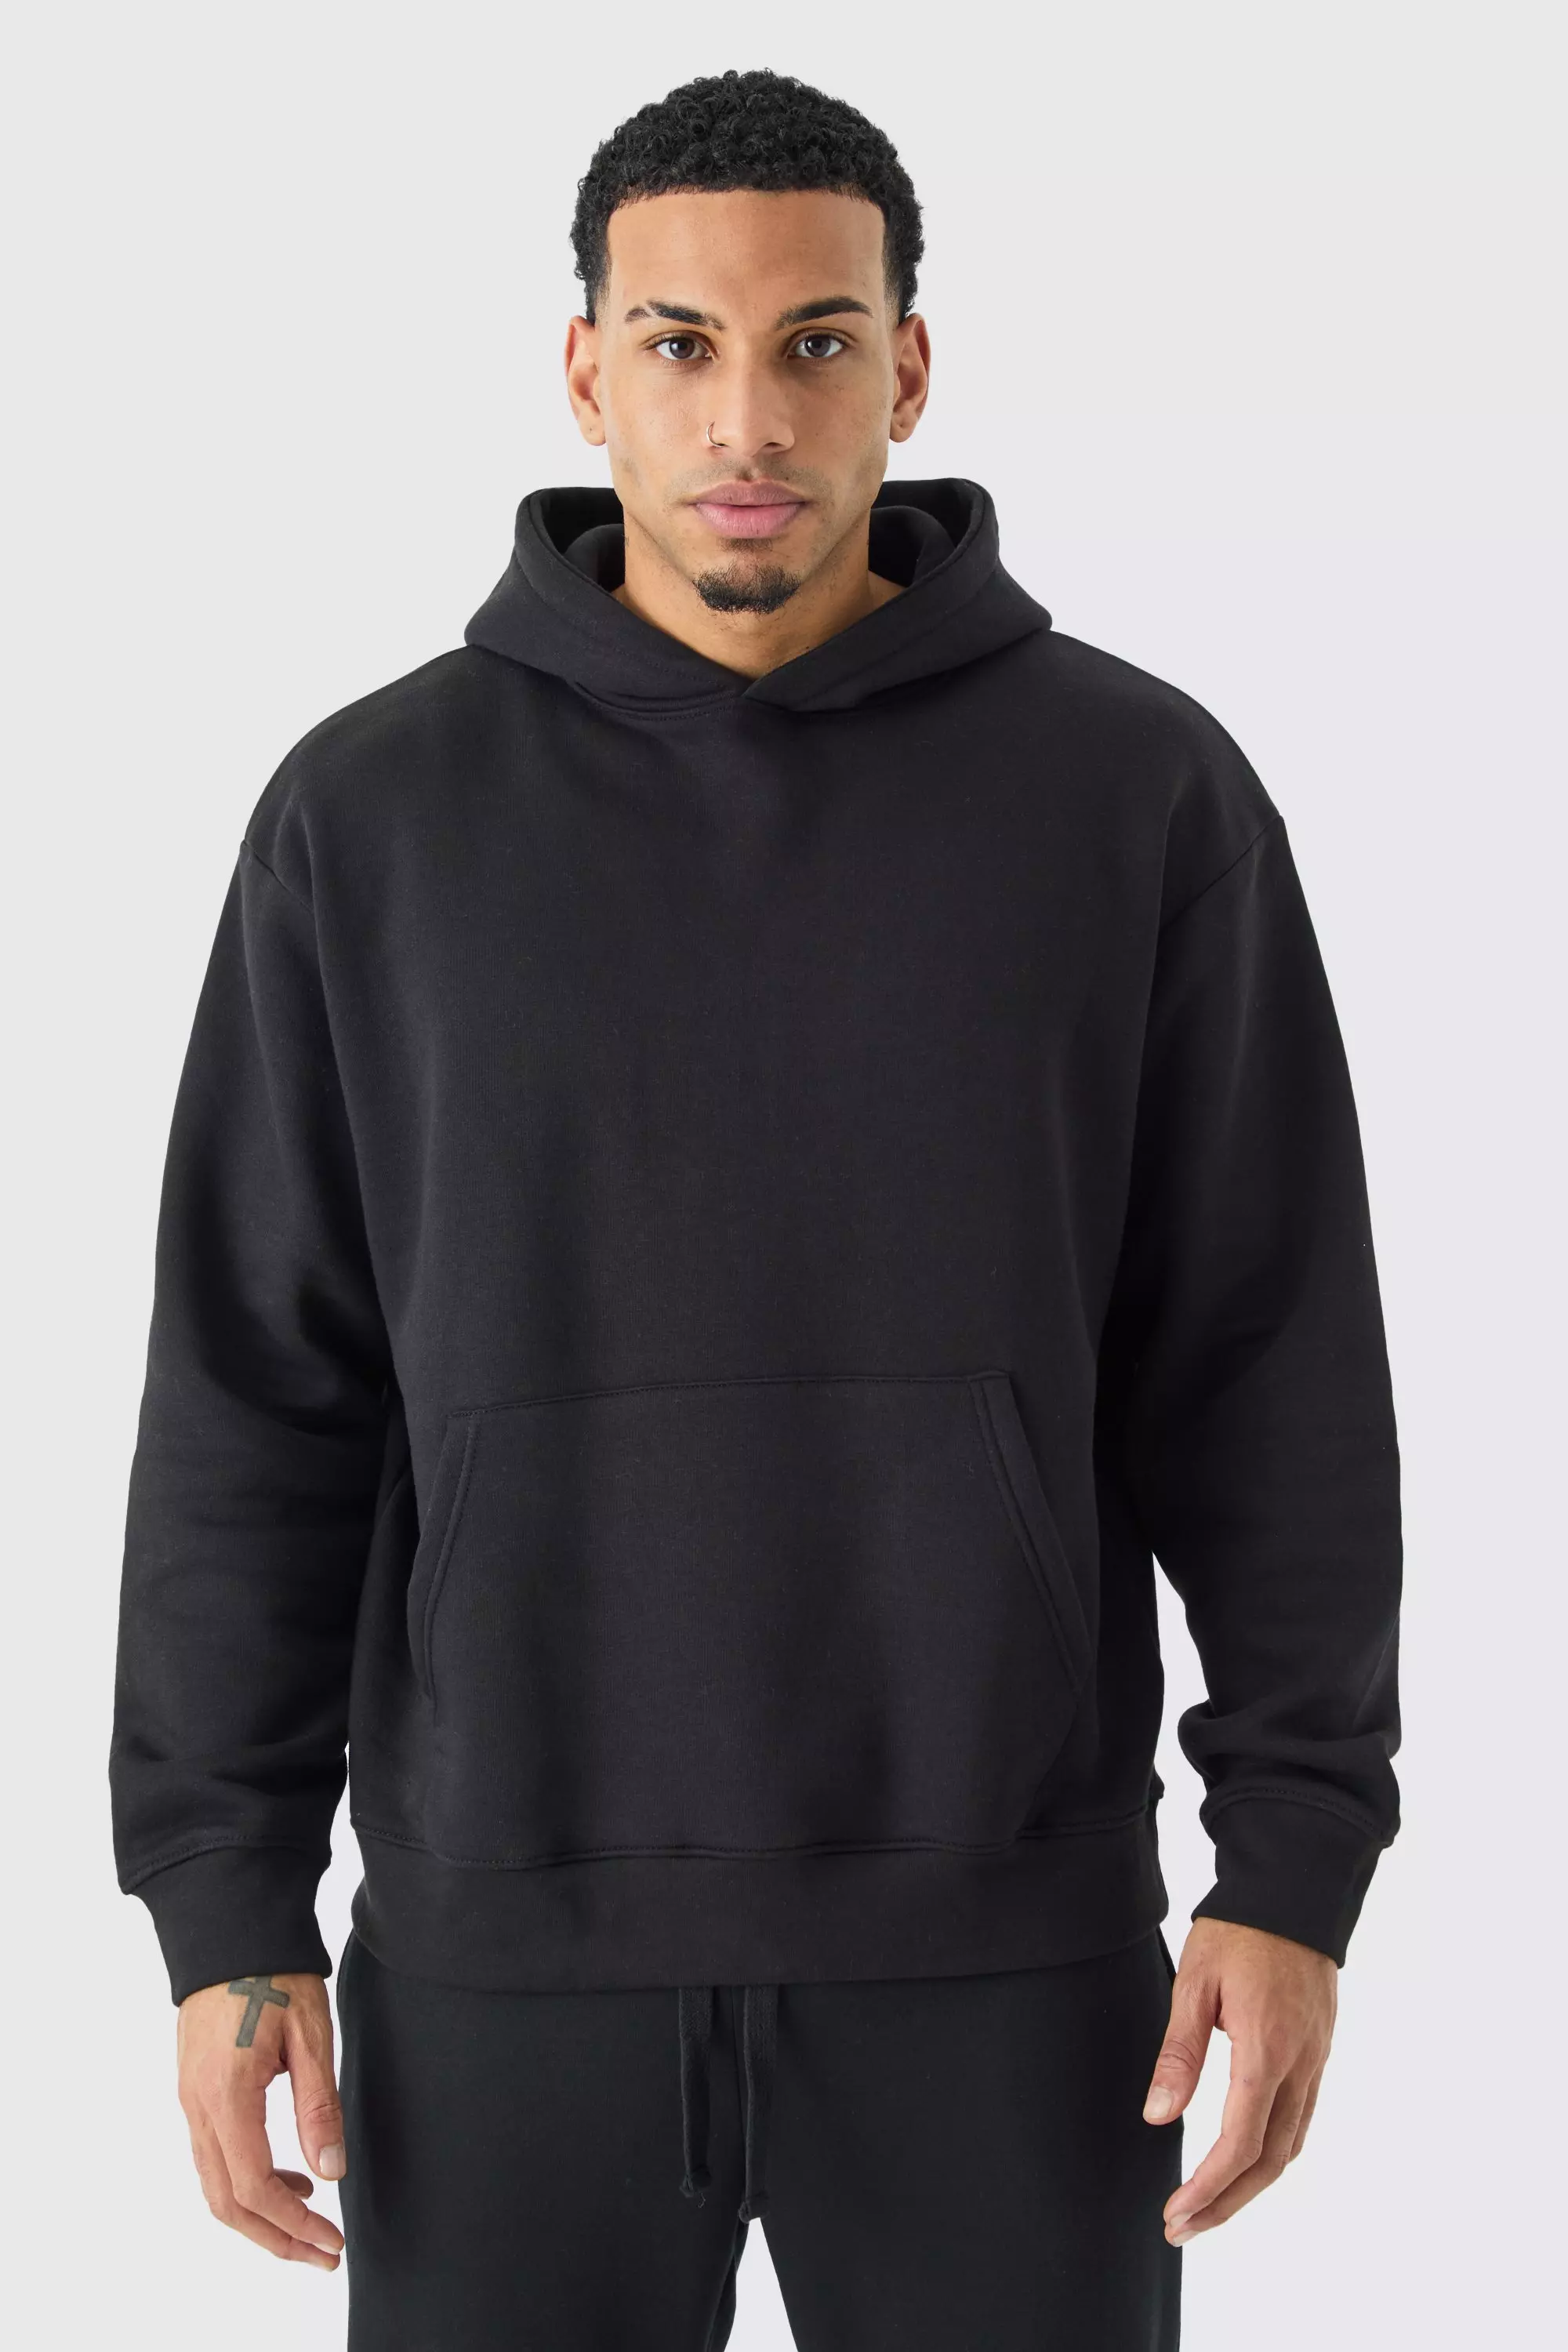 Basic Oversized Over The Head Hoodie Black